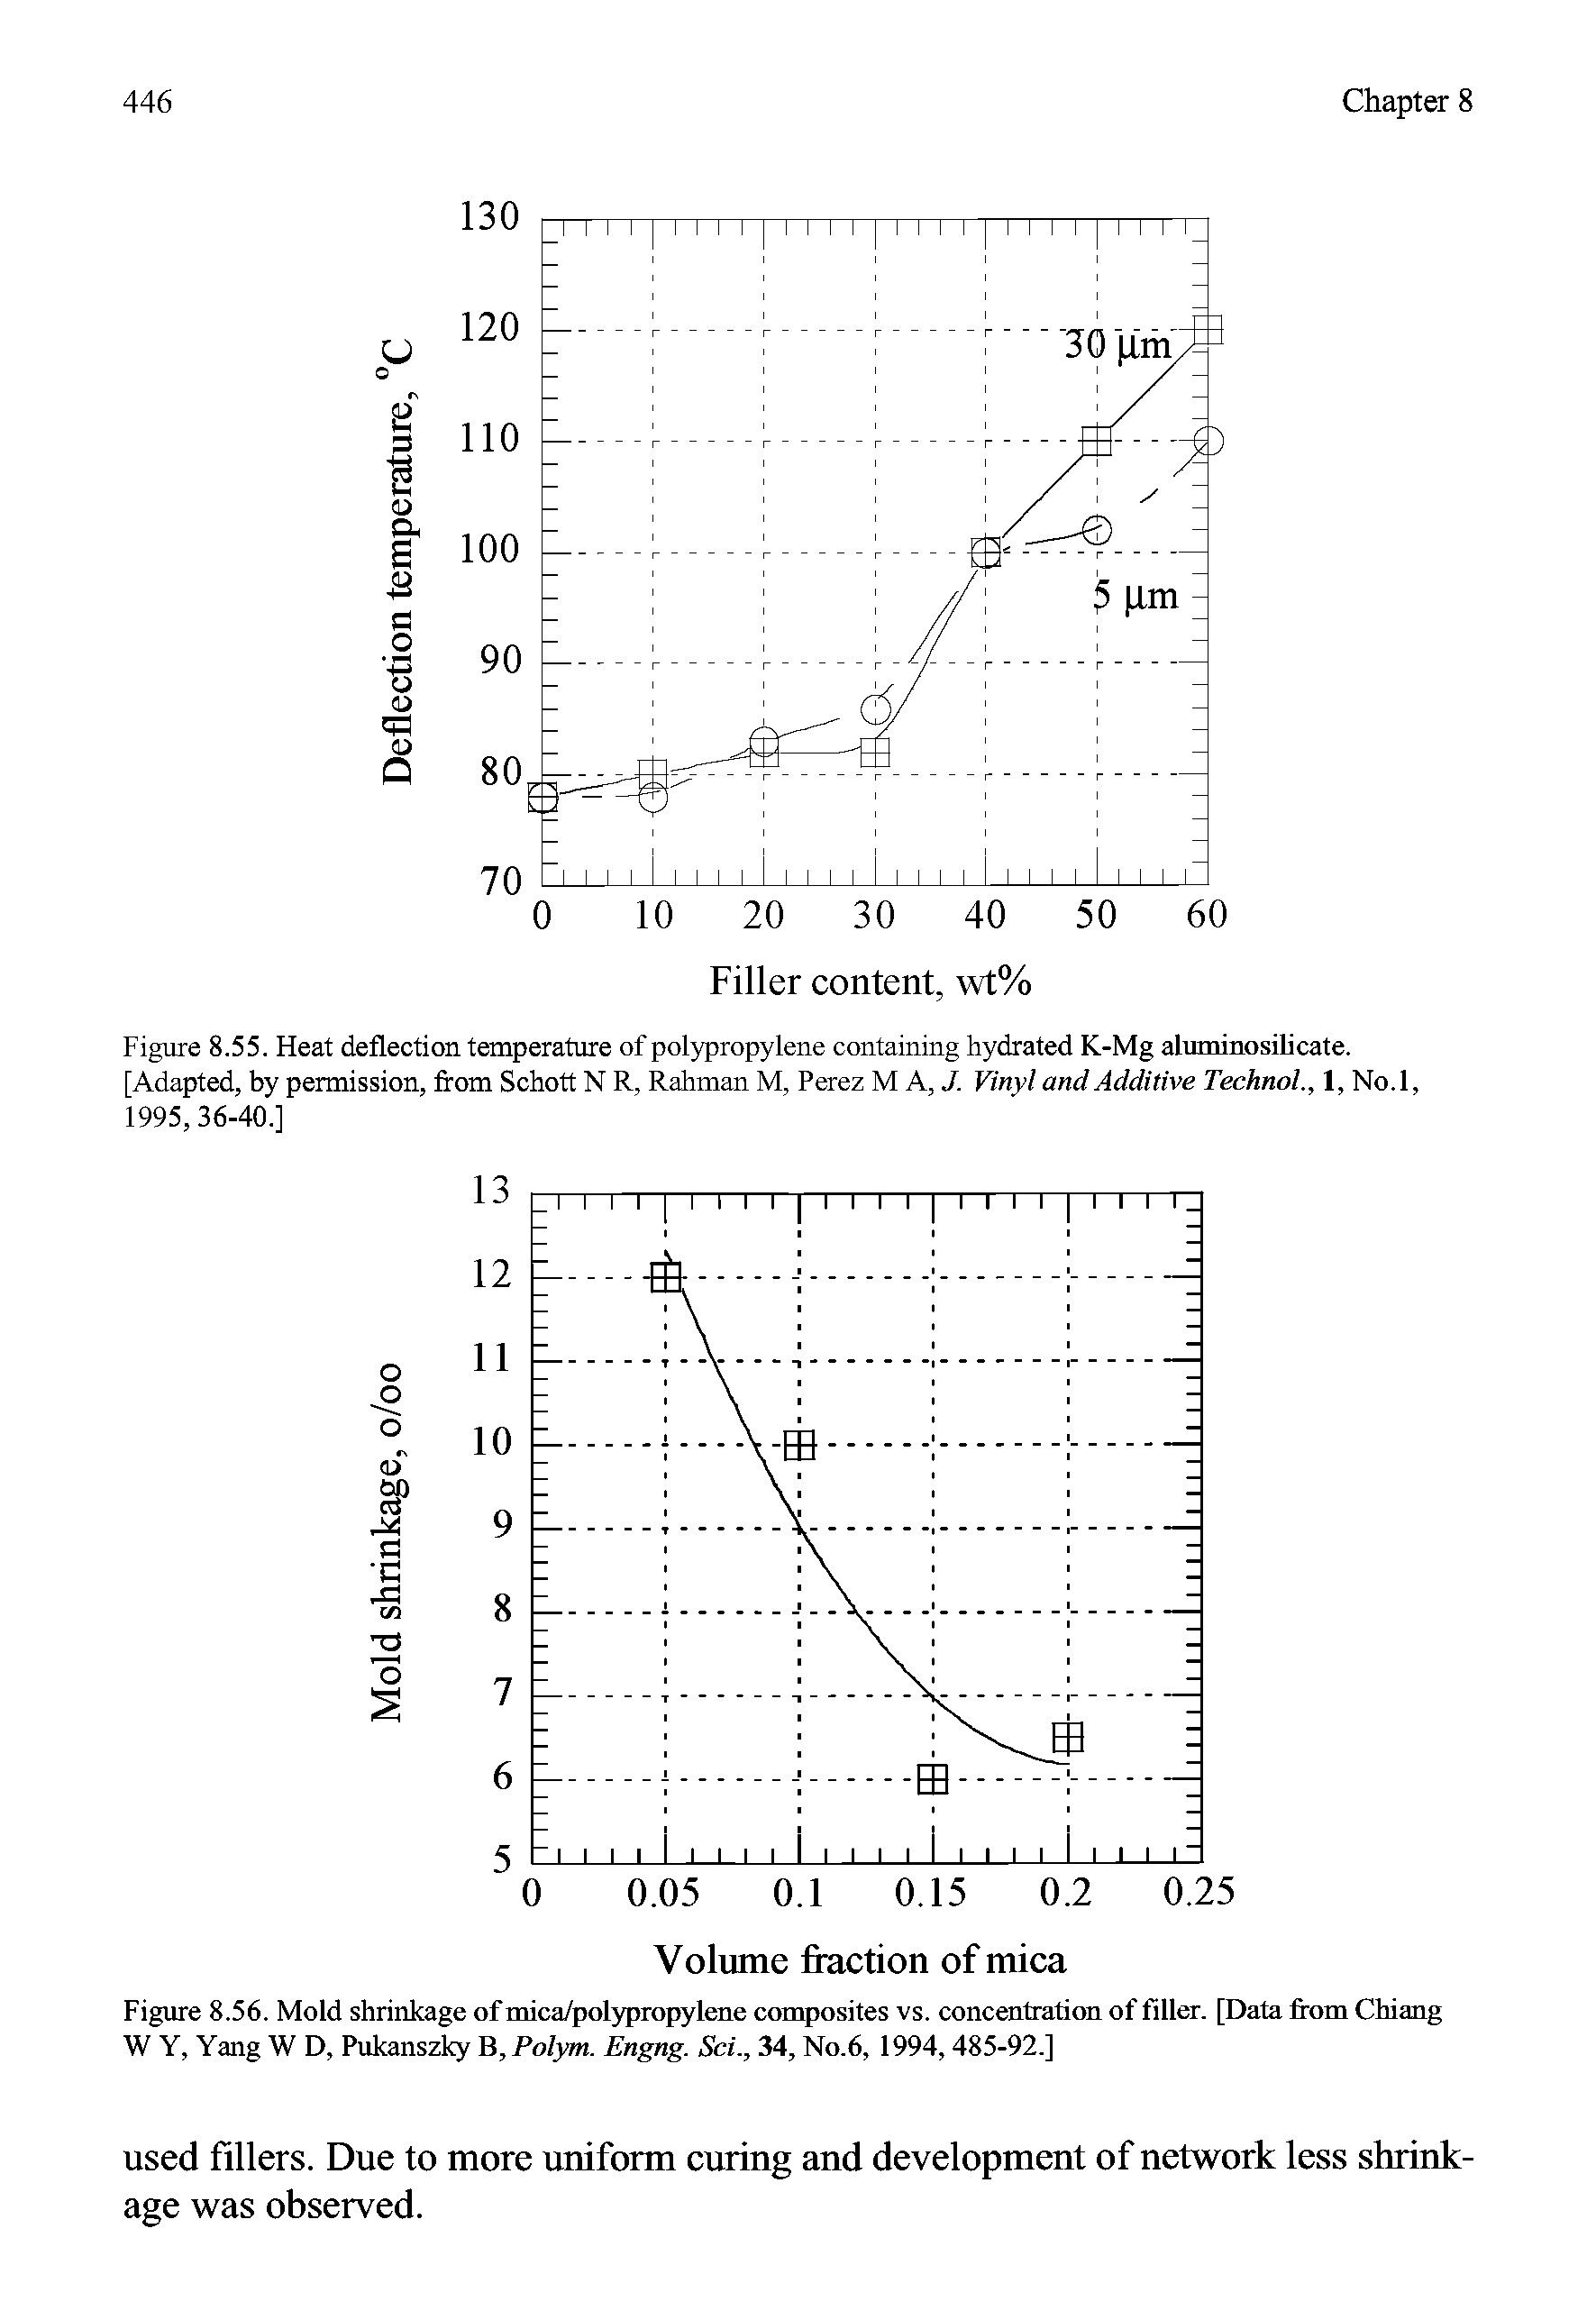 Figure 8.55. Heat deflection temperature of polypropylene containing hydrated K-Mg aluminosilicate. [Adapted, by permission, from Schott N R, Rahman M, Perez M A, J. Vinyl and Additive Technol., 1, No.l, 1995,36-40.]...